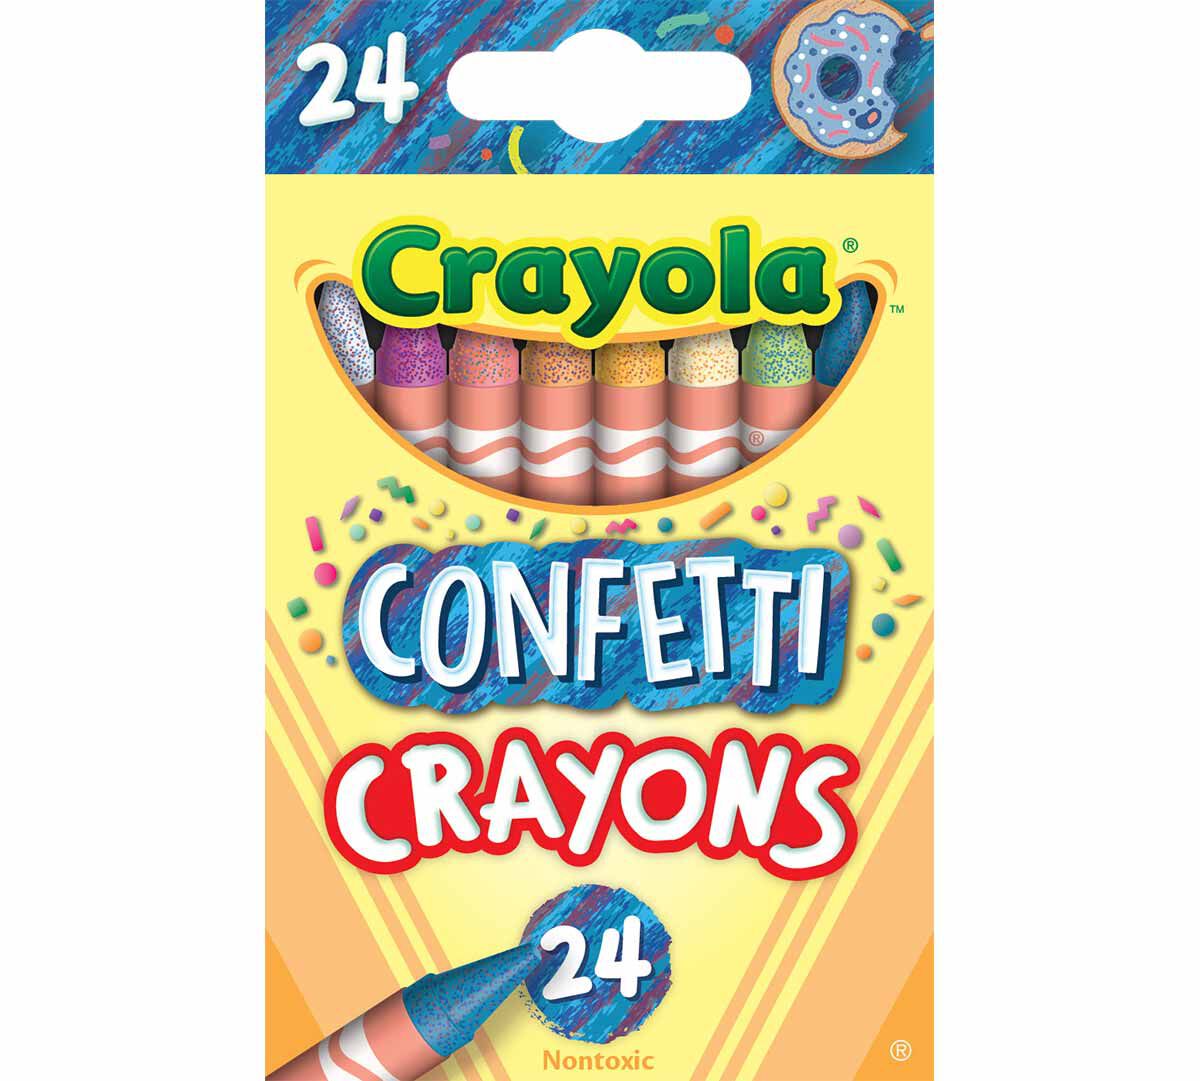 Kids Party Favors & Party Activities, Crayola.com